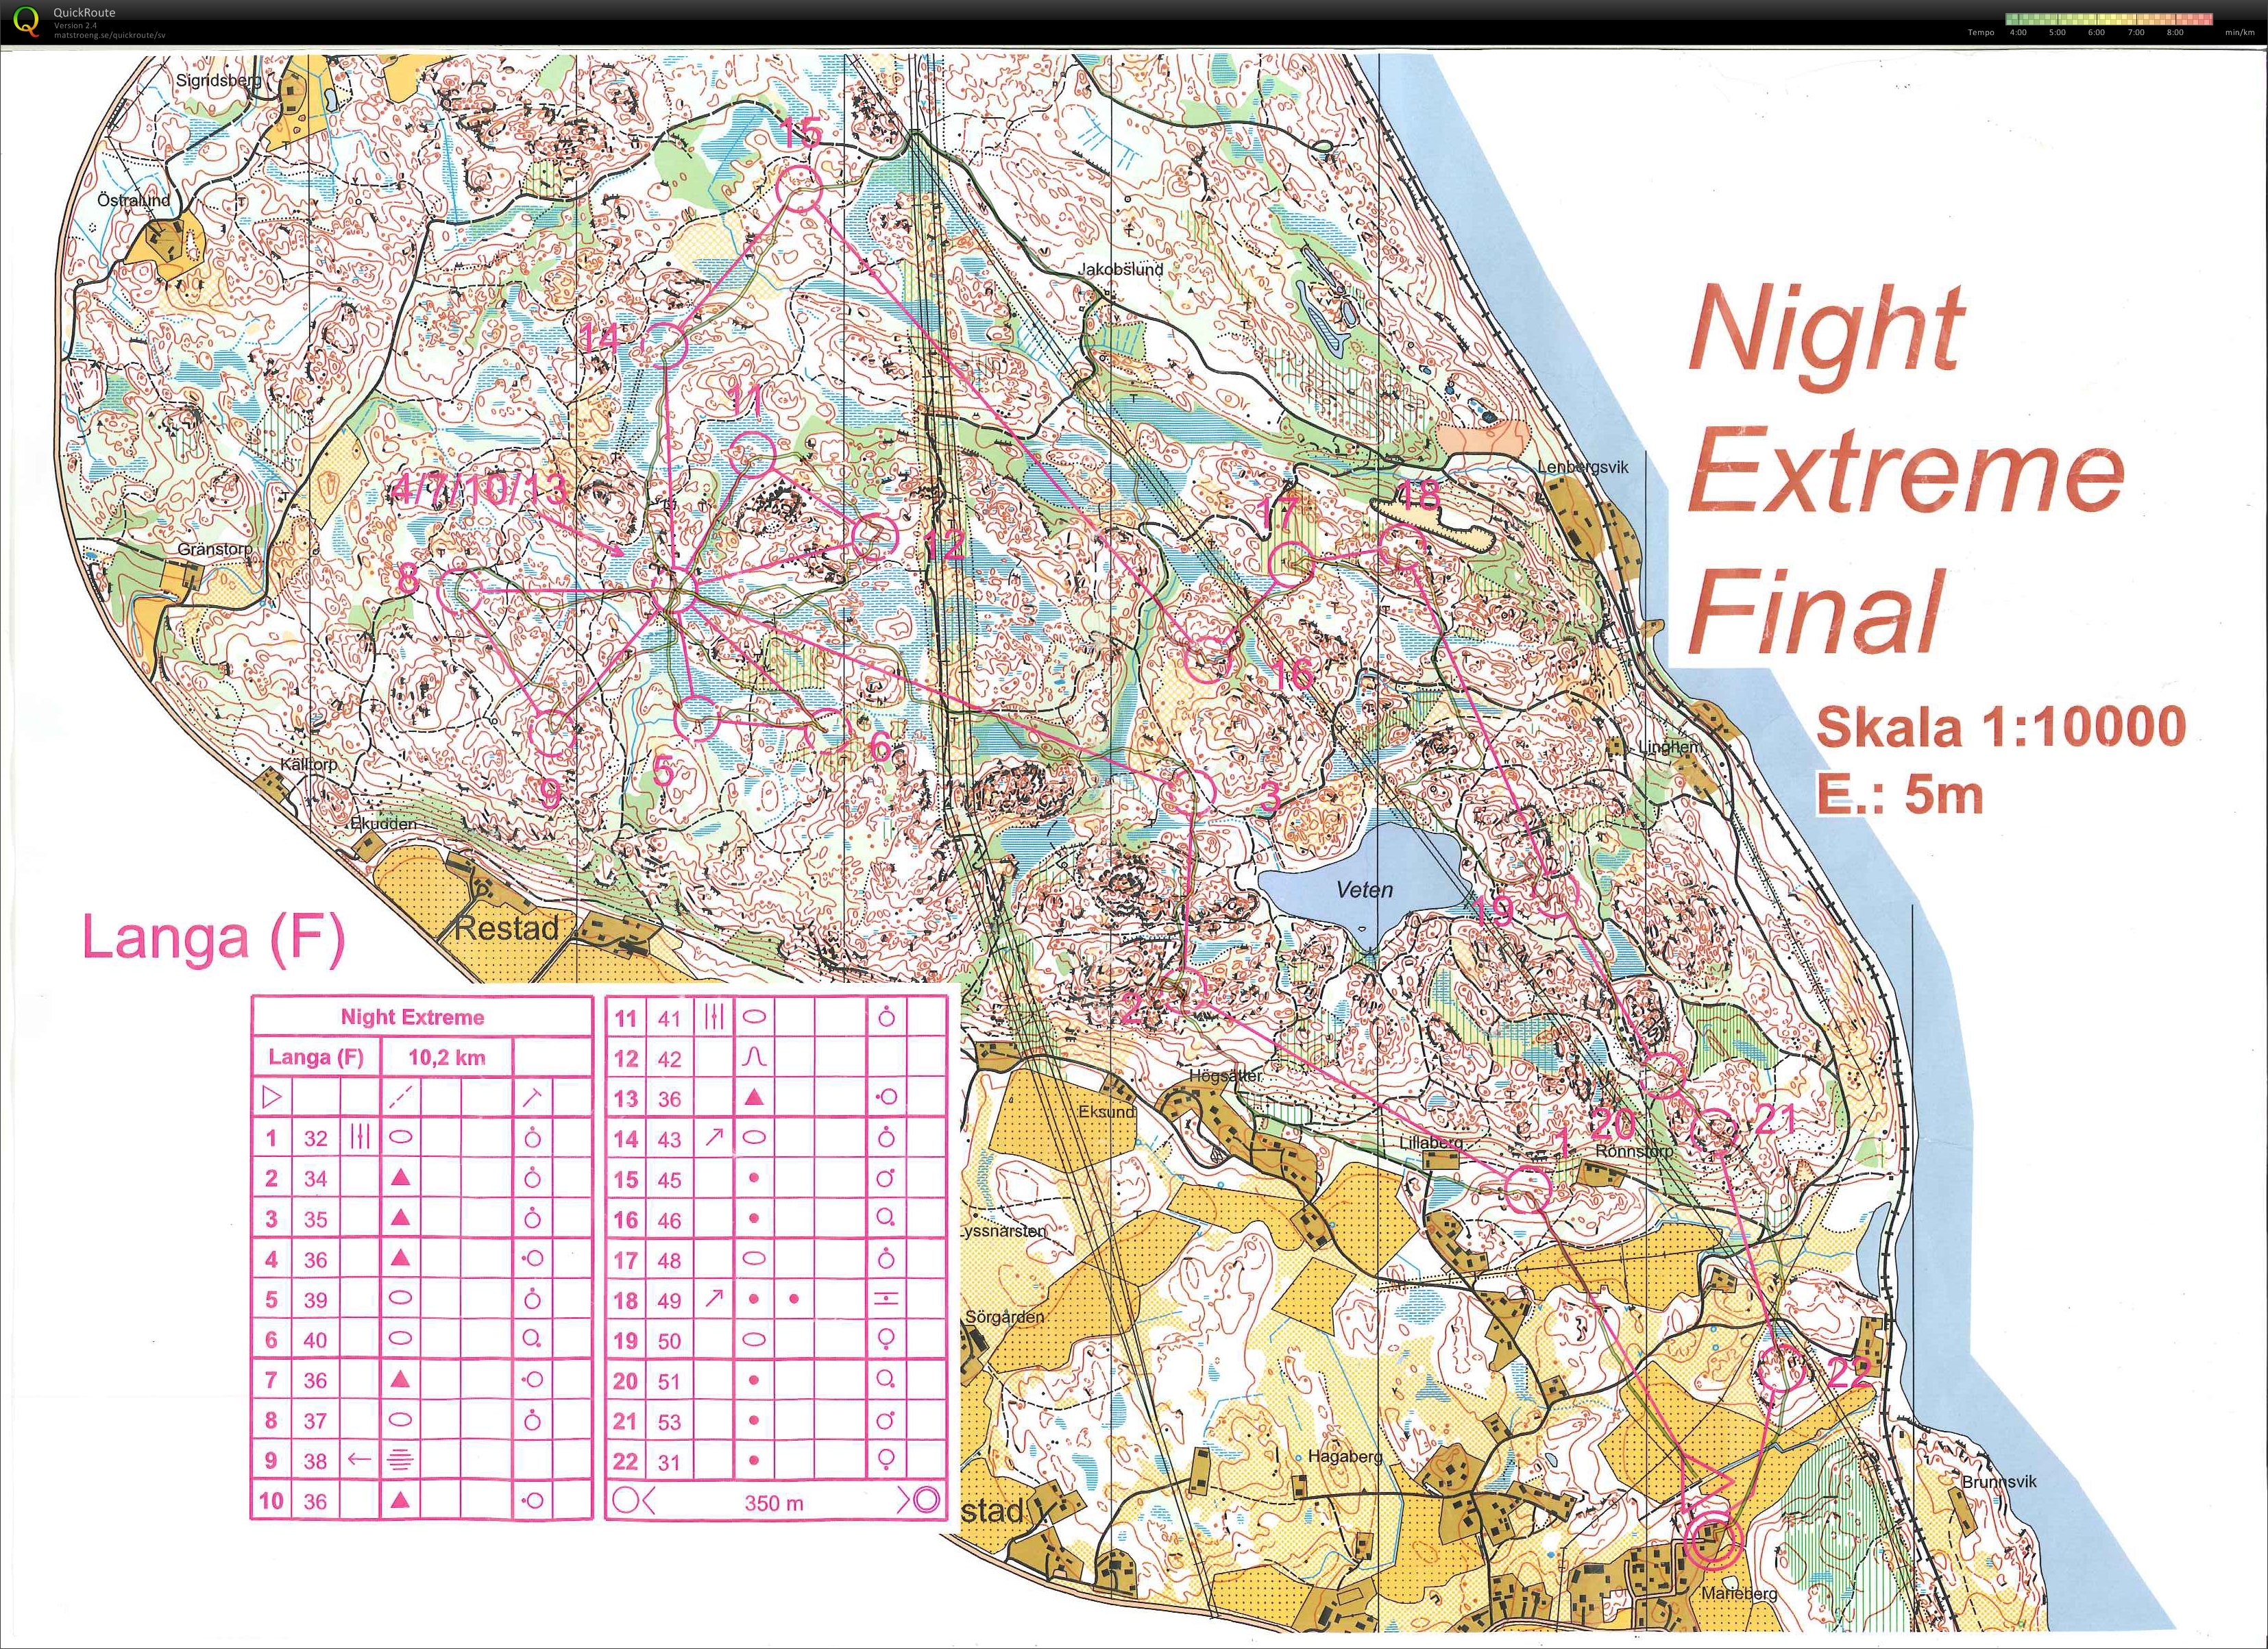 Night Extreme Final (13-03-2012)